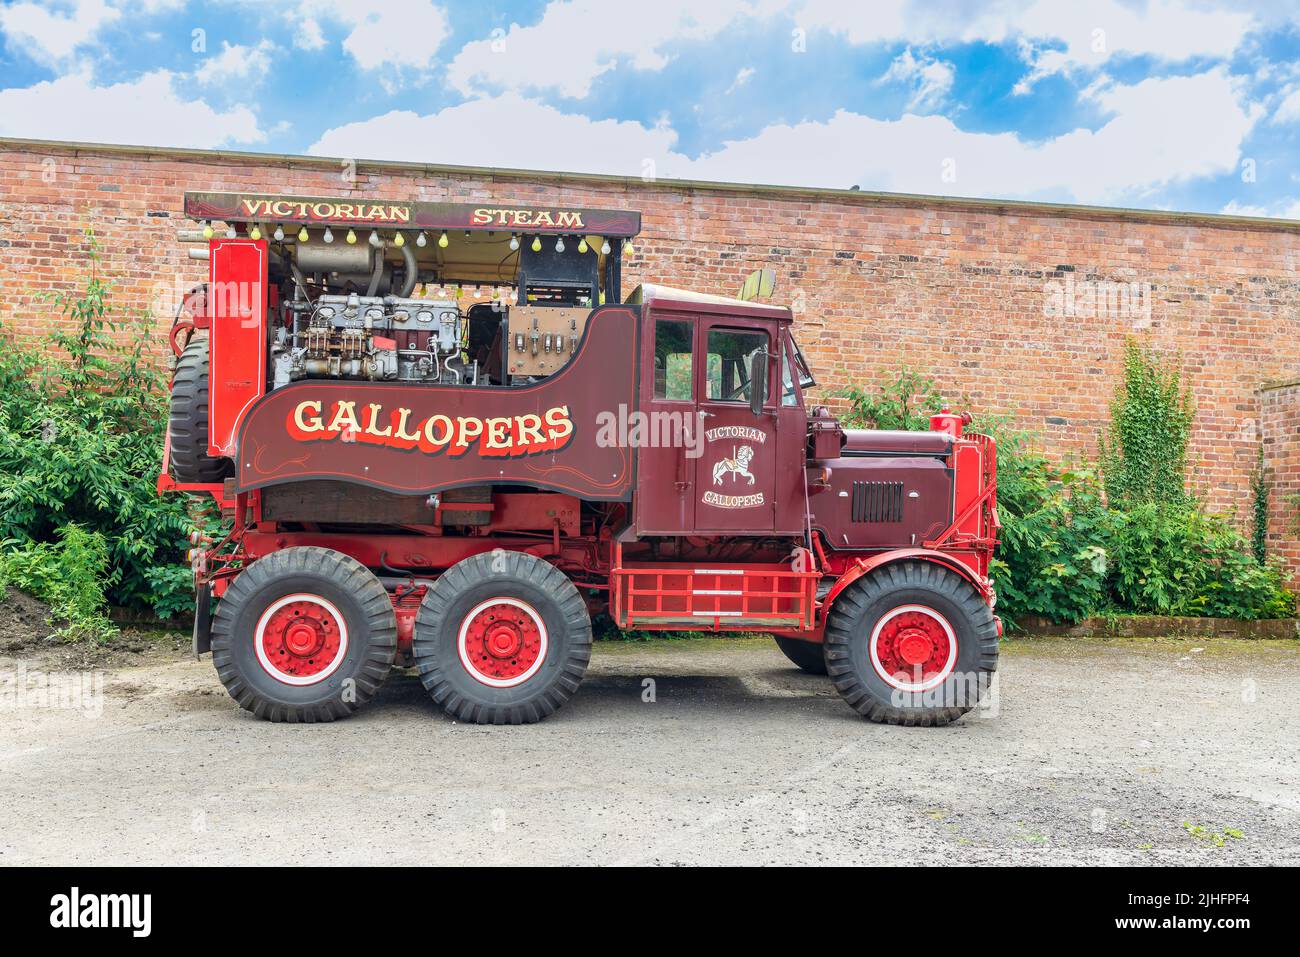 Vintage Scammell Explorer truck housing a generator for the Victorian steam gallopers fairground ride in Tatton Park near Knutsford, UK. Stock Photo